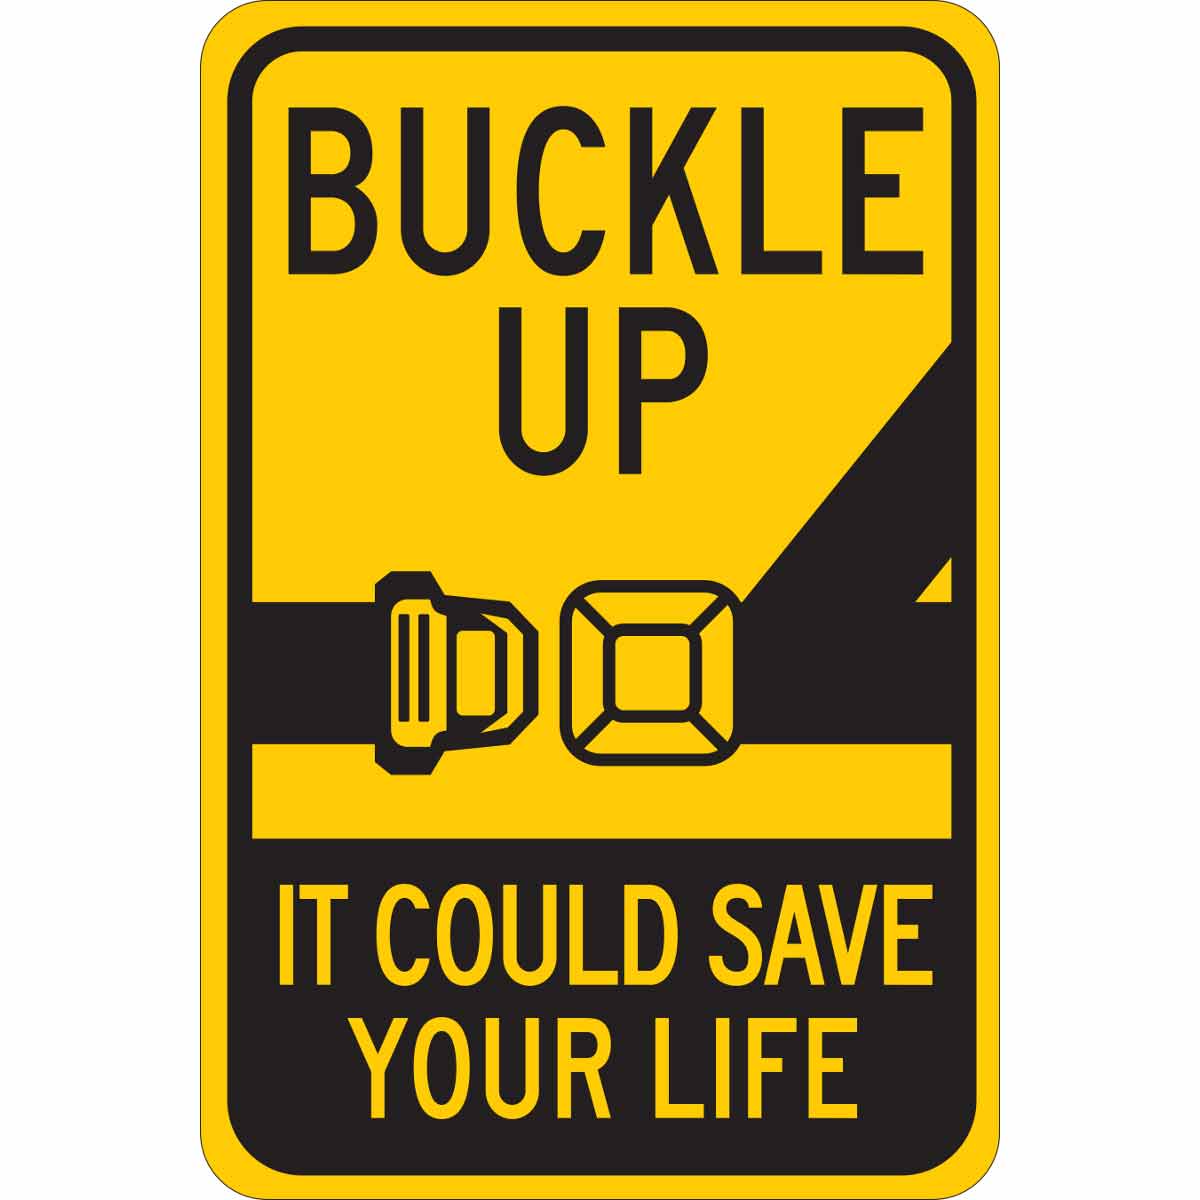 Buckle Up With Brutus, Child Car Safety